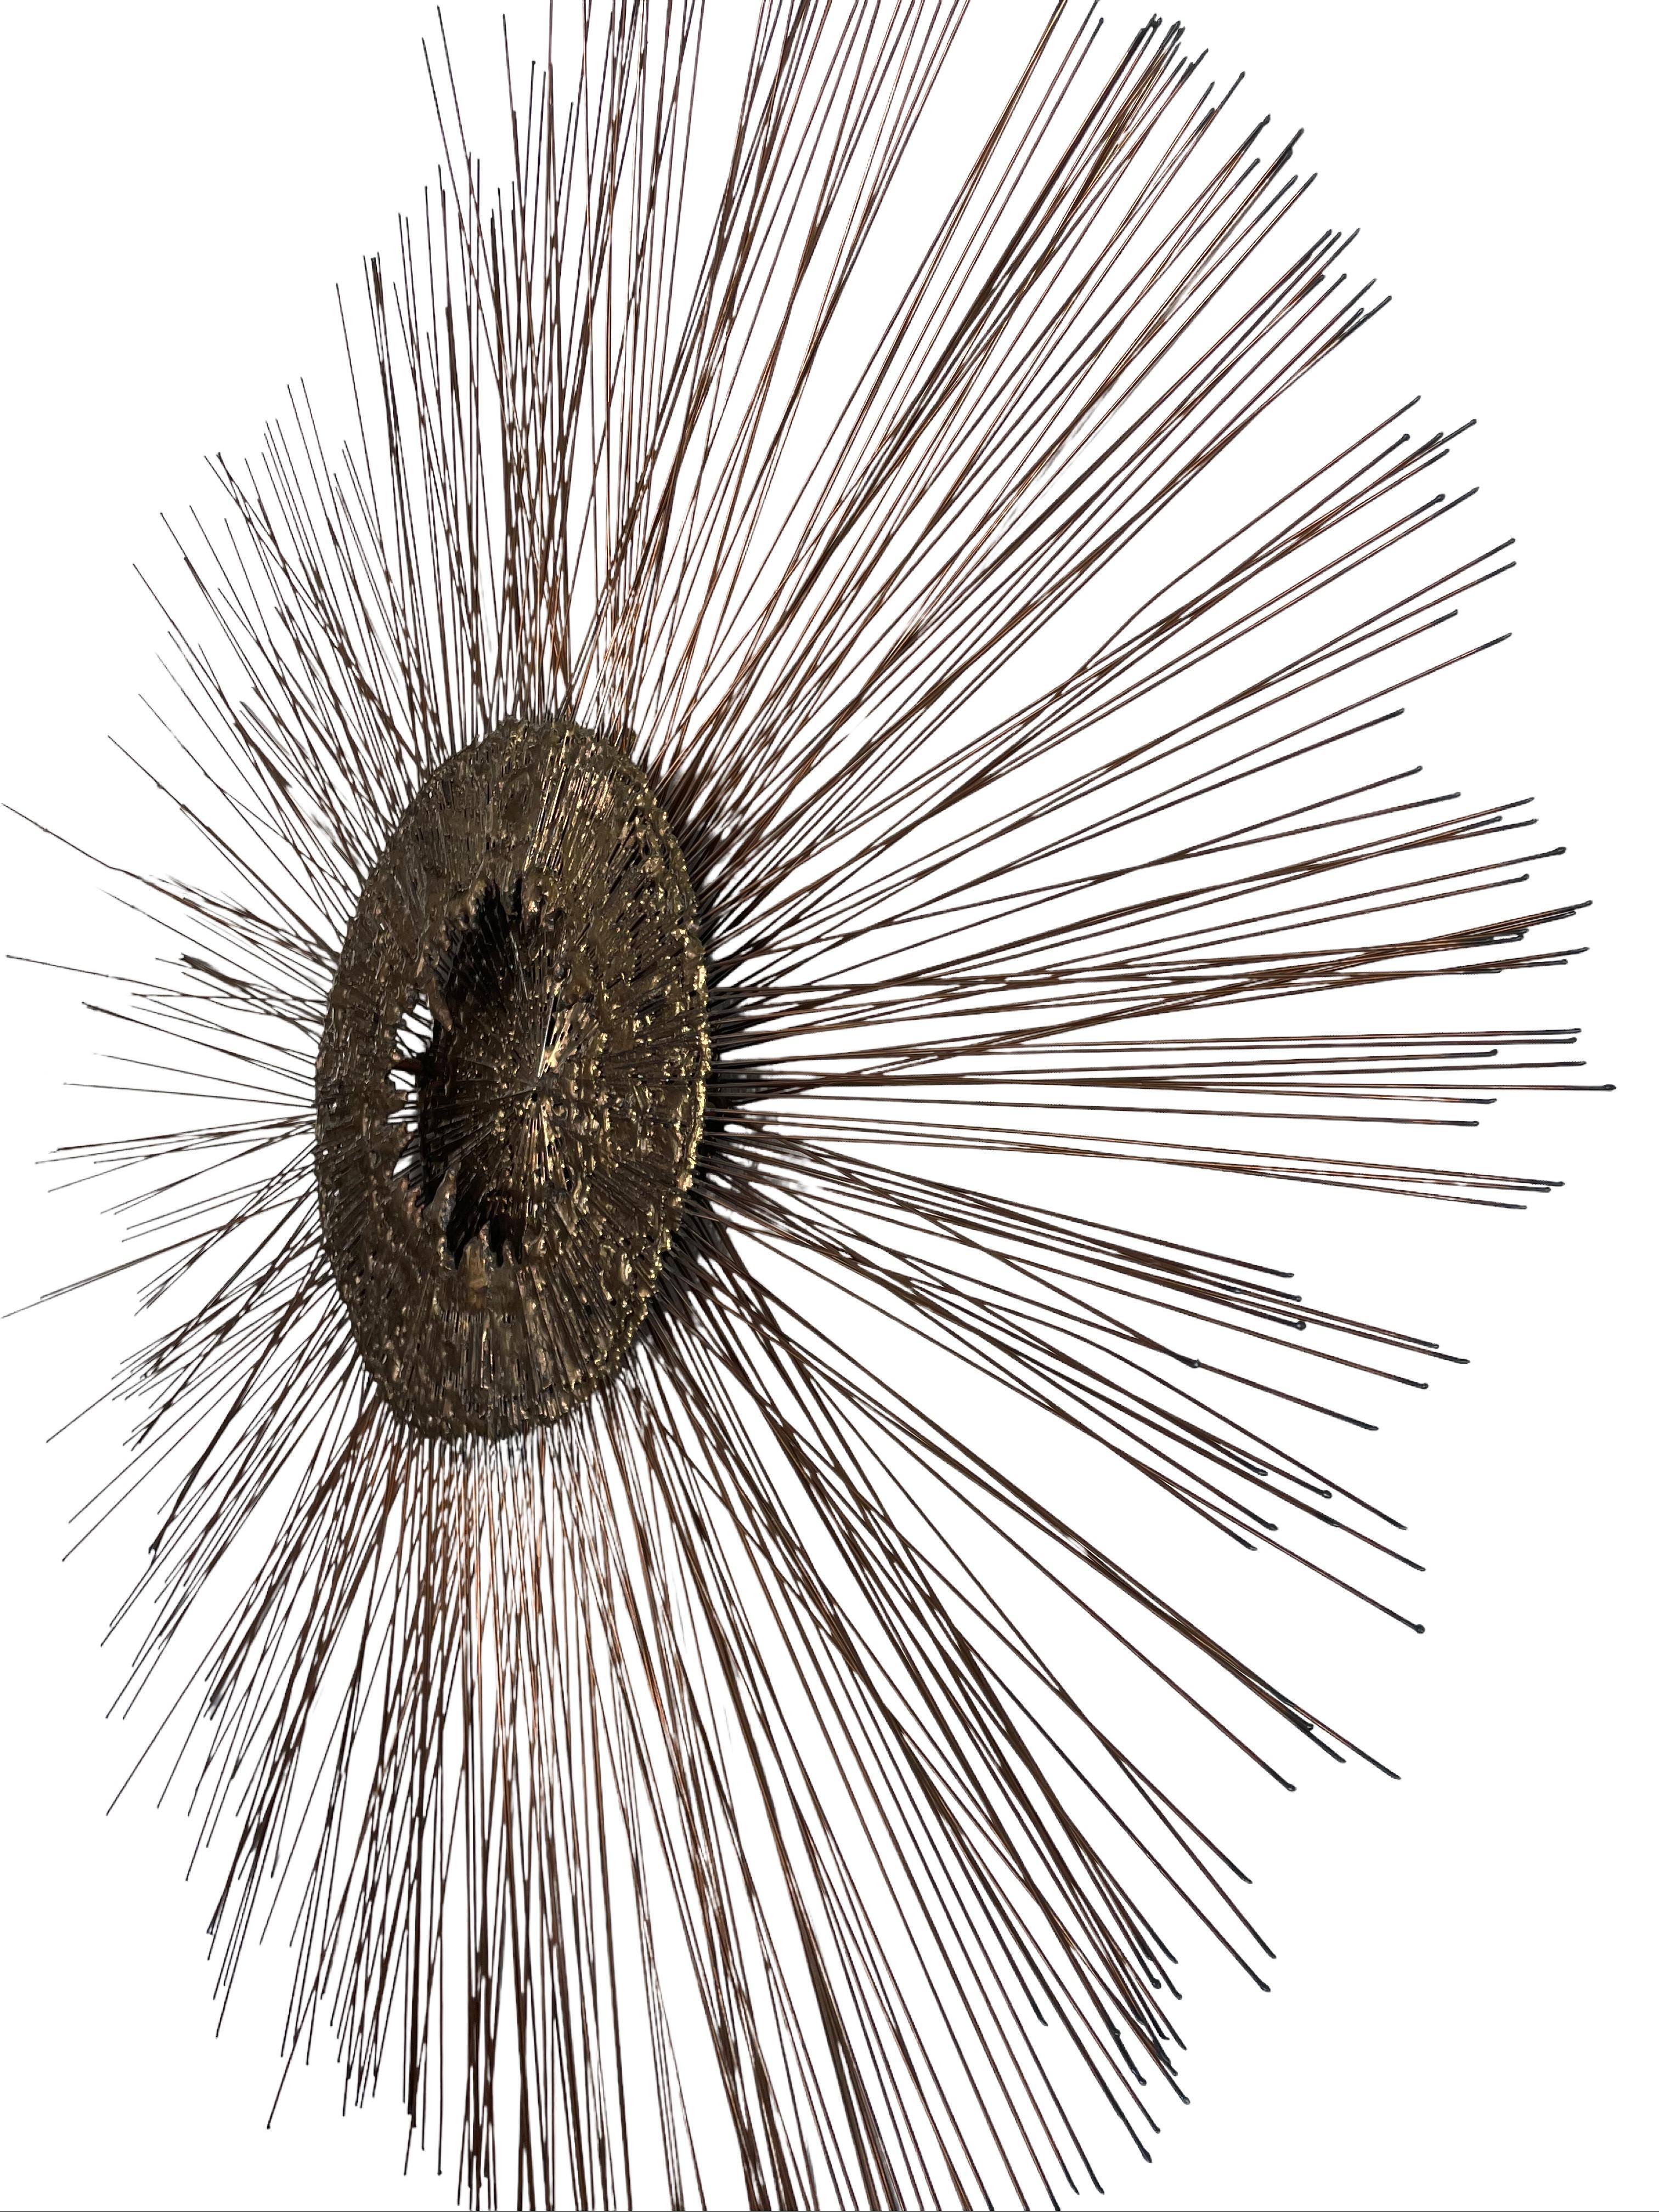 This Curtis Jeré (Curtis Freiler and Jerry Fels) mid-century modern metal starburst wall sculpture is a stunning example of the craftmanship of this team that created some of the most dramatic decorative objects during the ‘60s and ‘70s. This